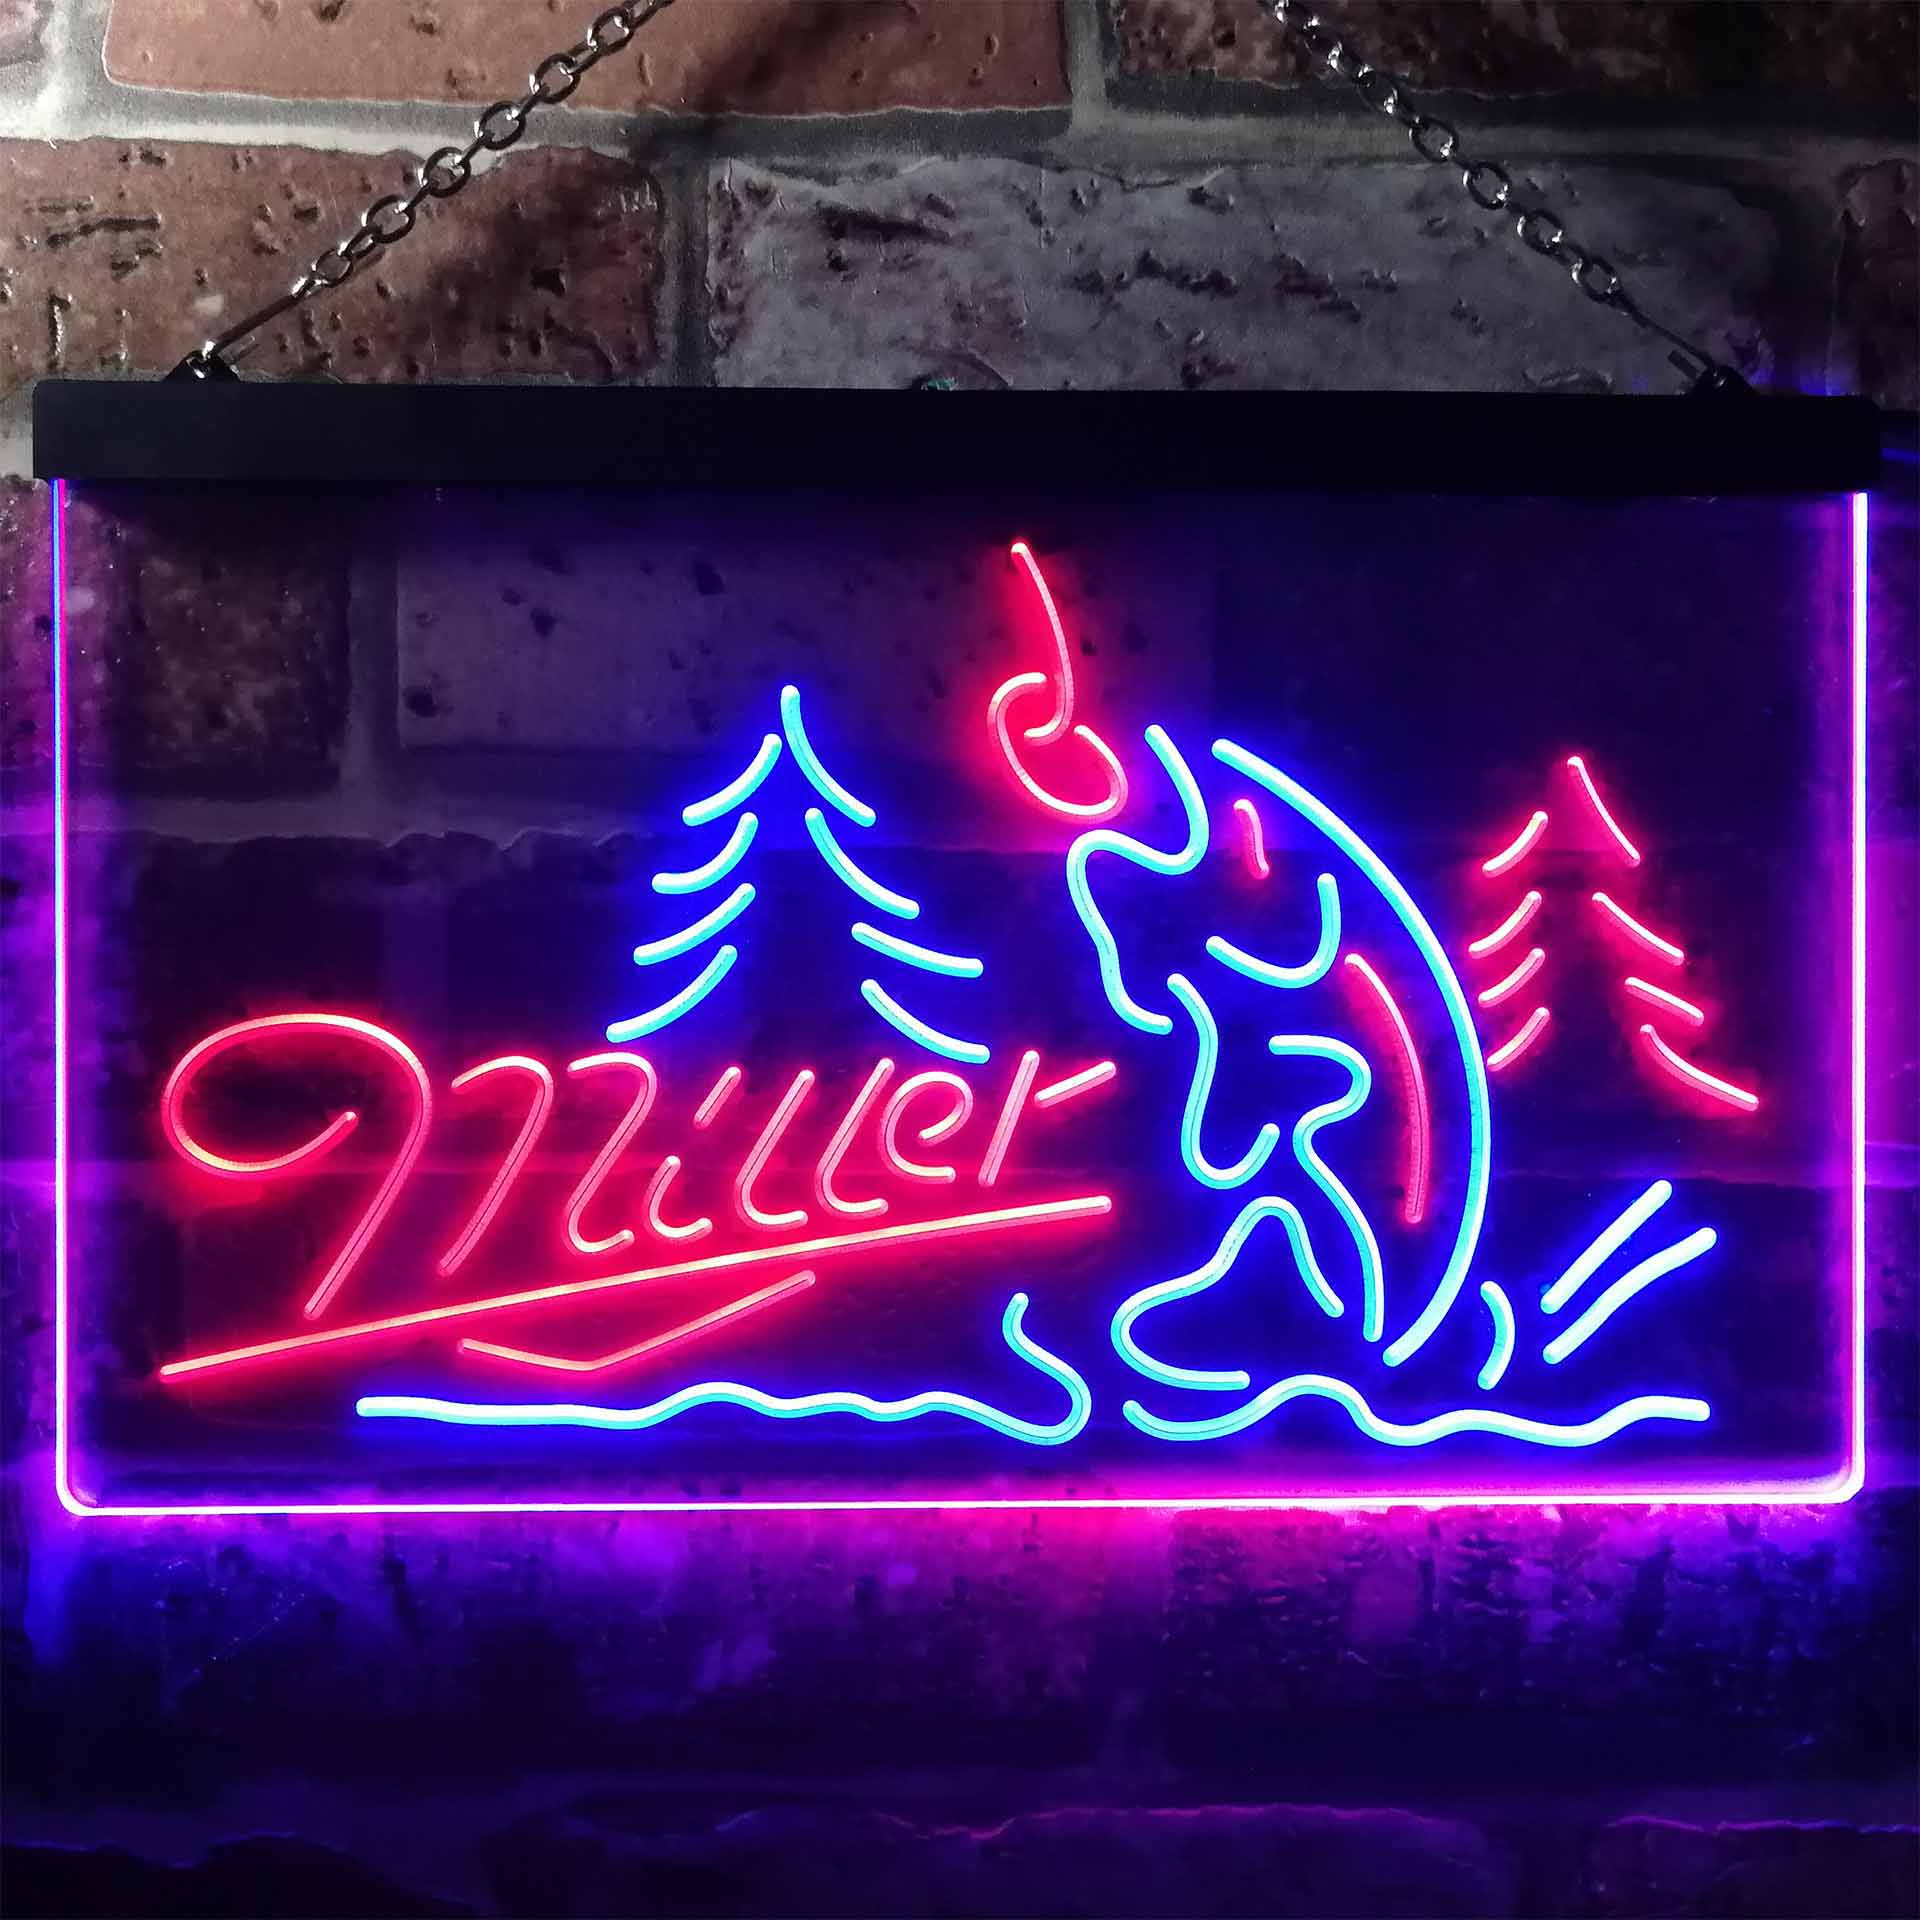 Millers Fishs Fishing LED Neon Sign